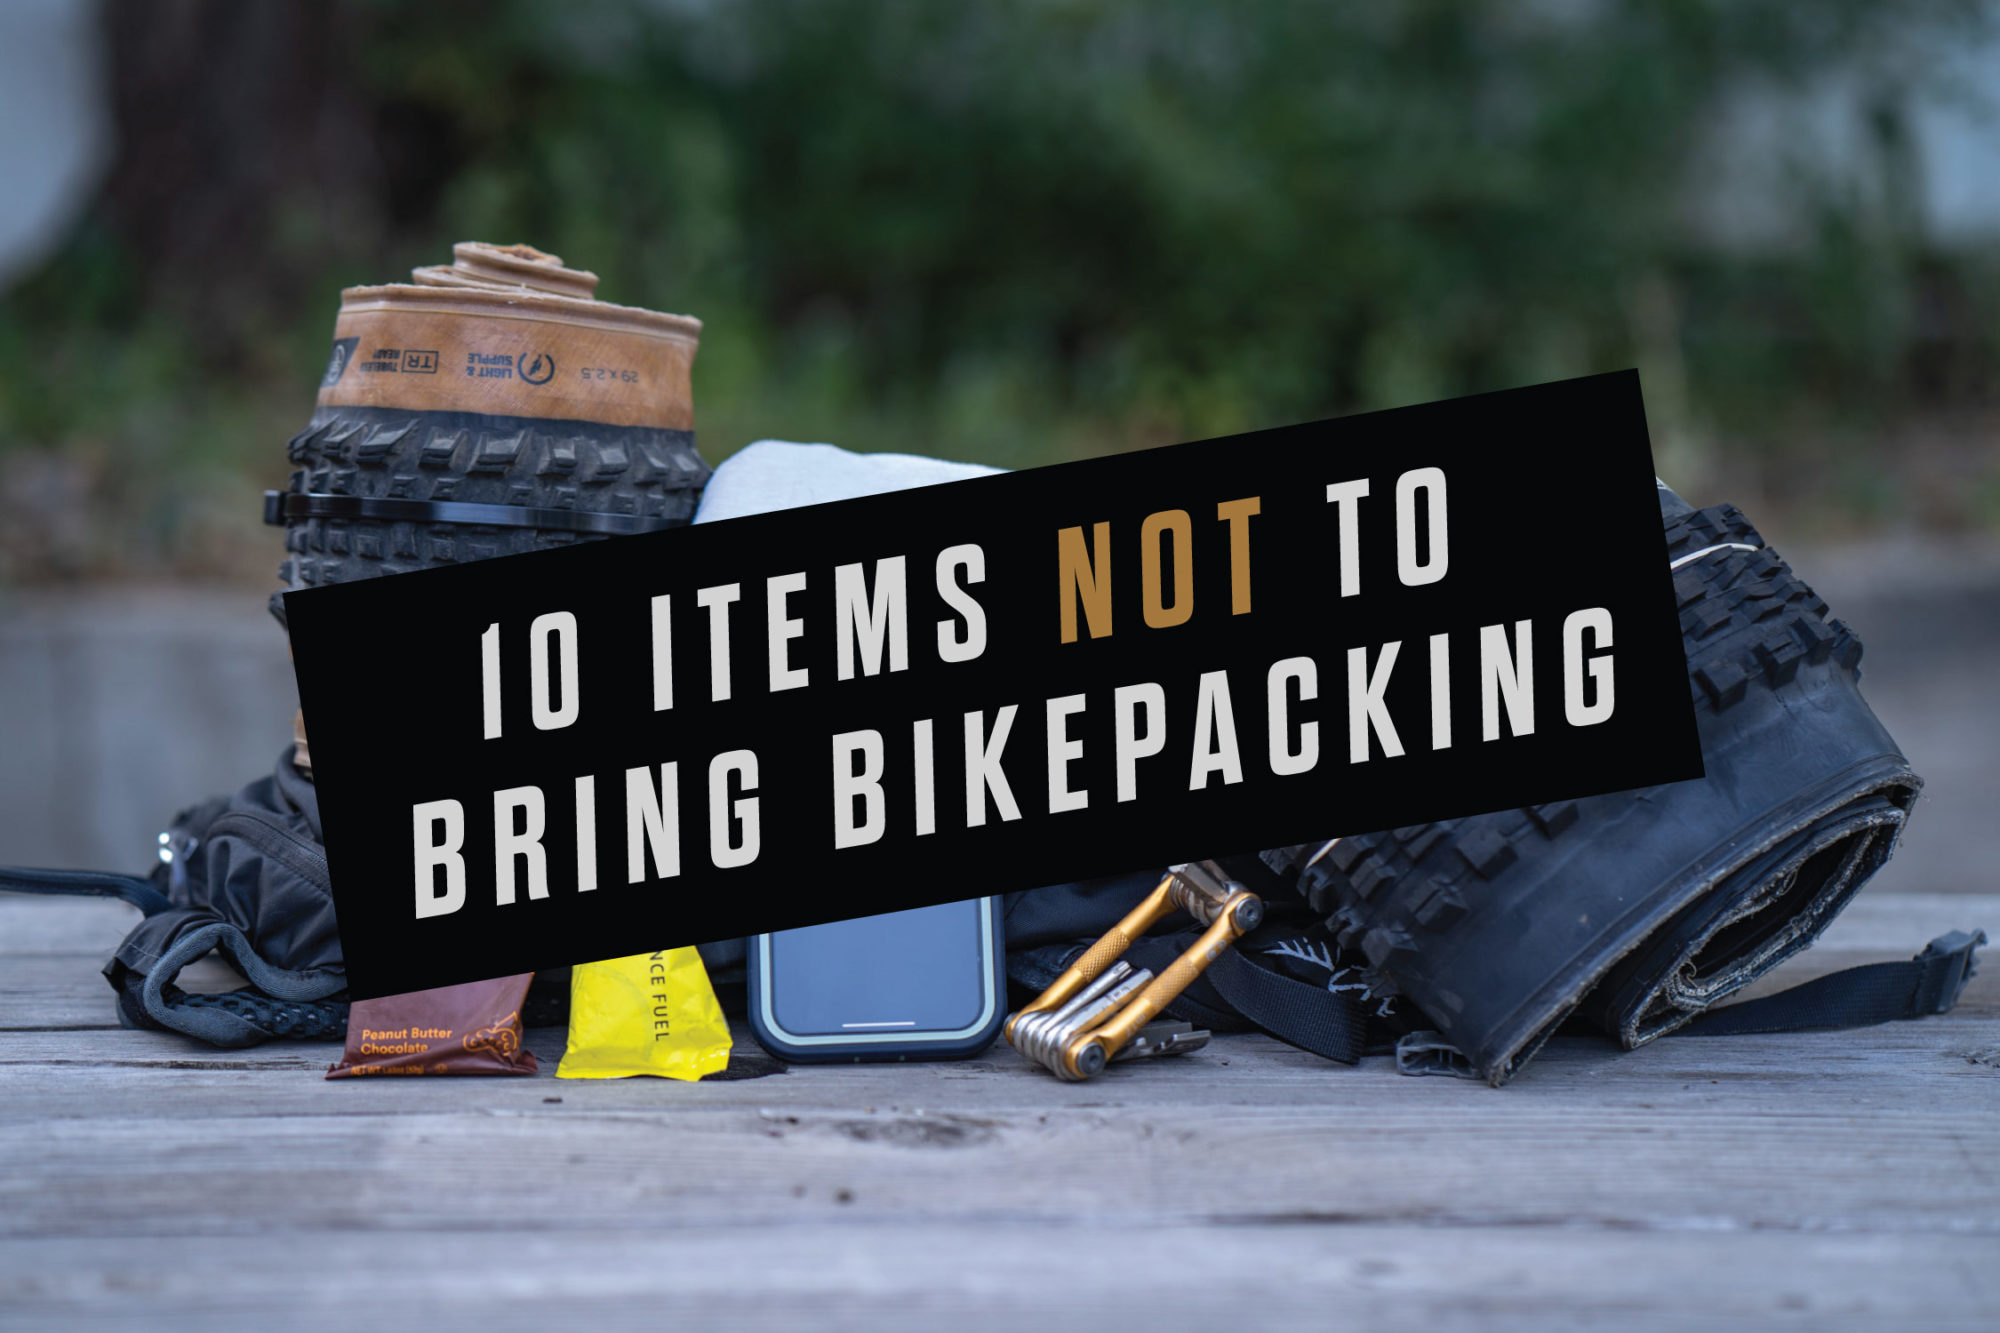 10 Items Not To Bring Bikepacking